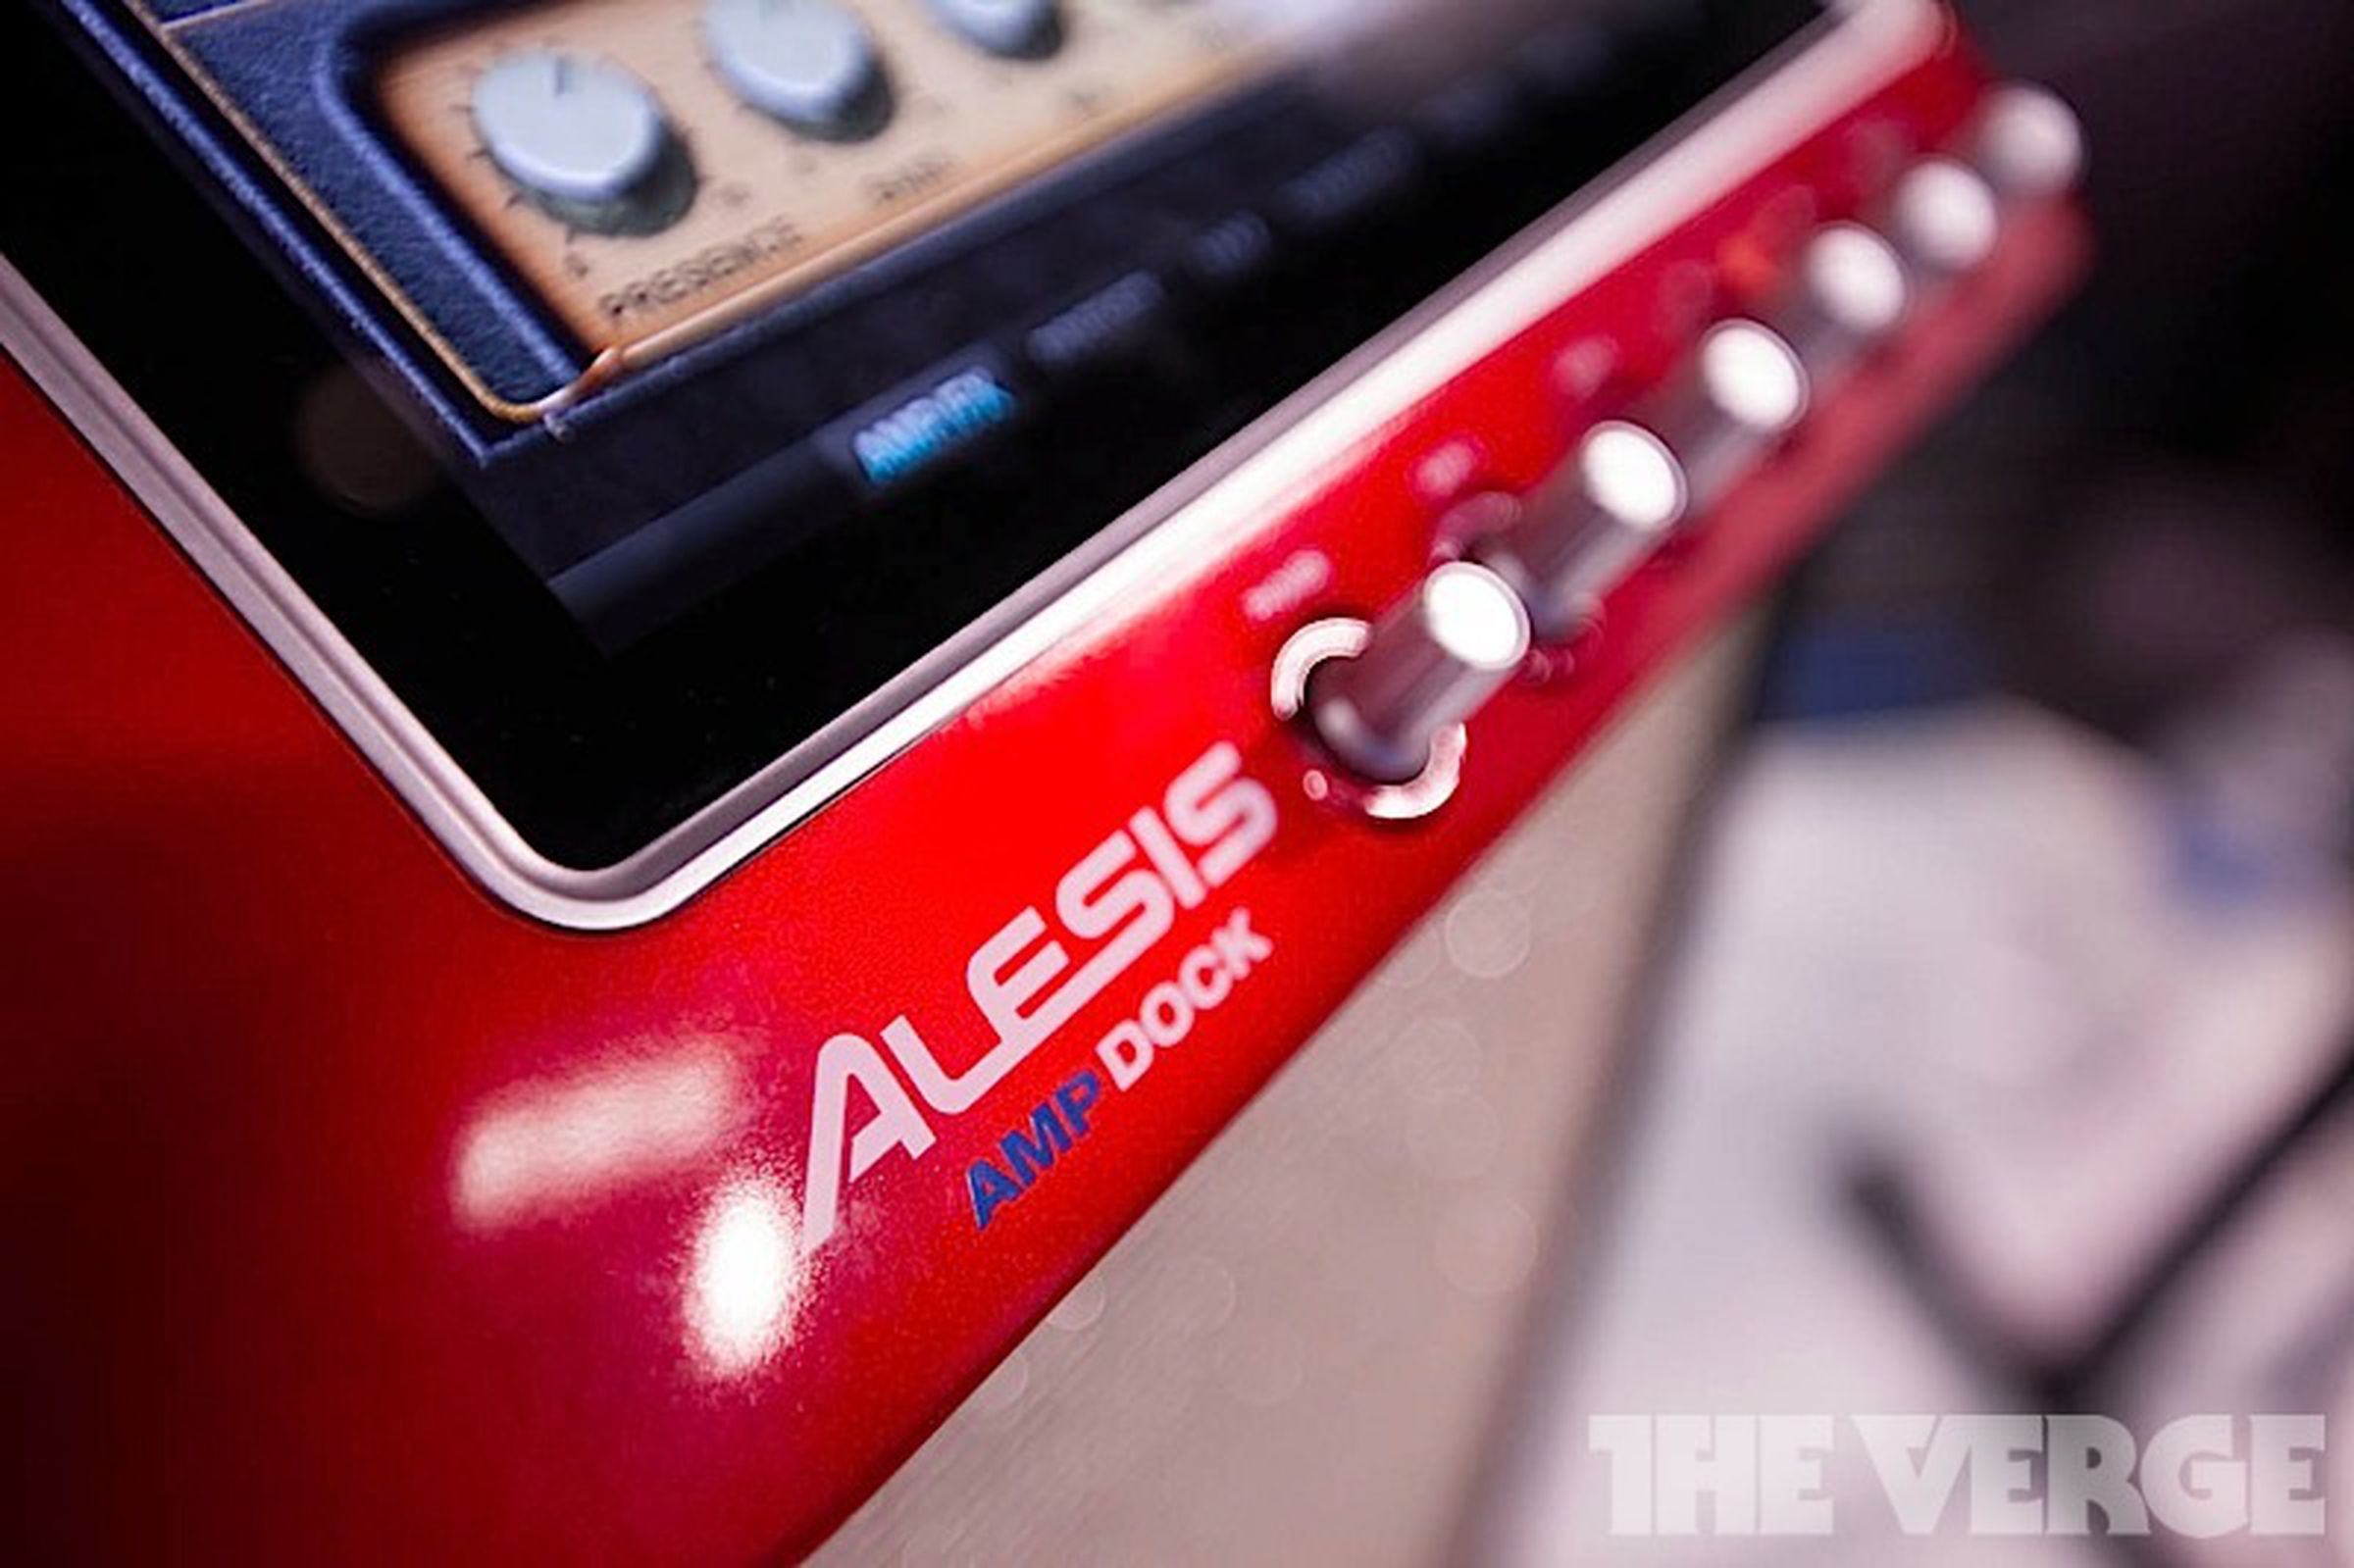 Alesis DM Dock and Amp Dock for iPad